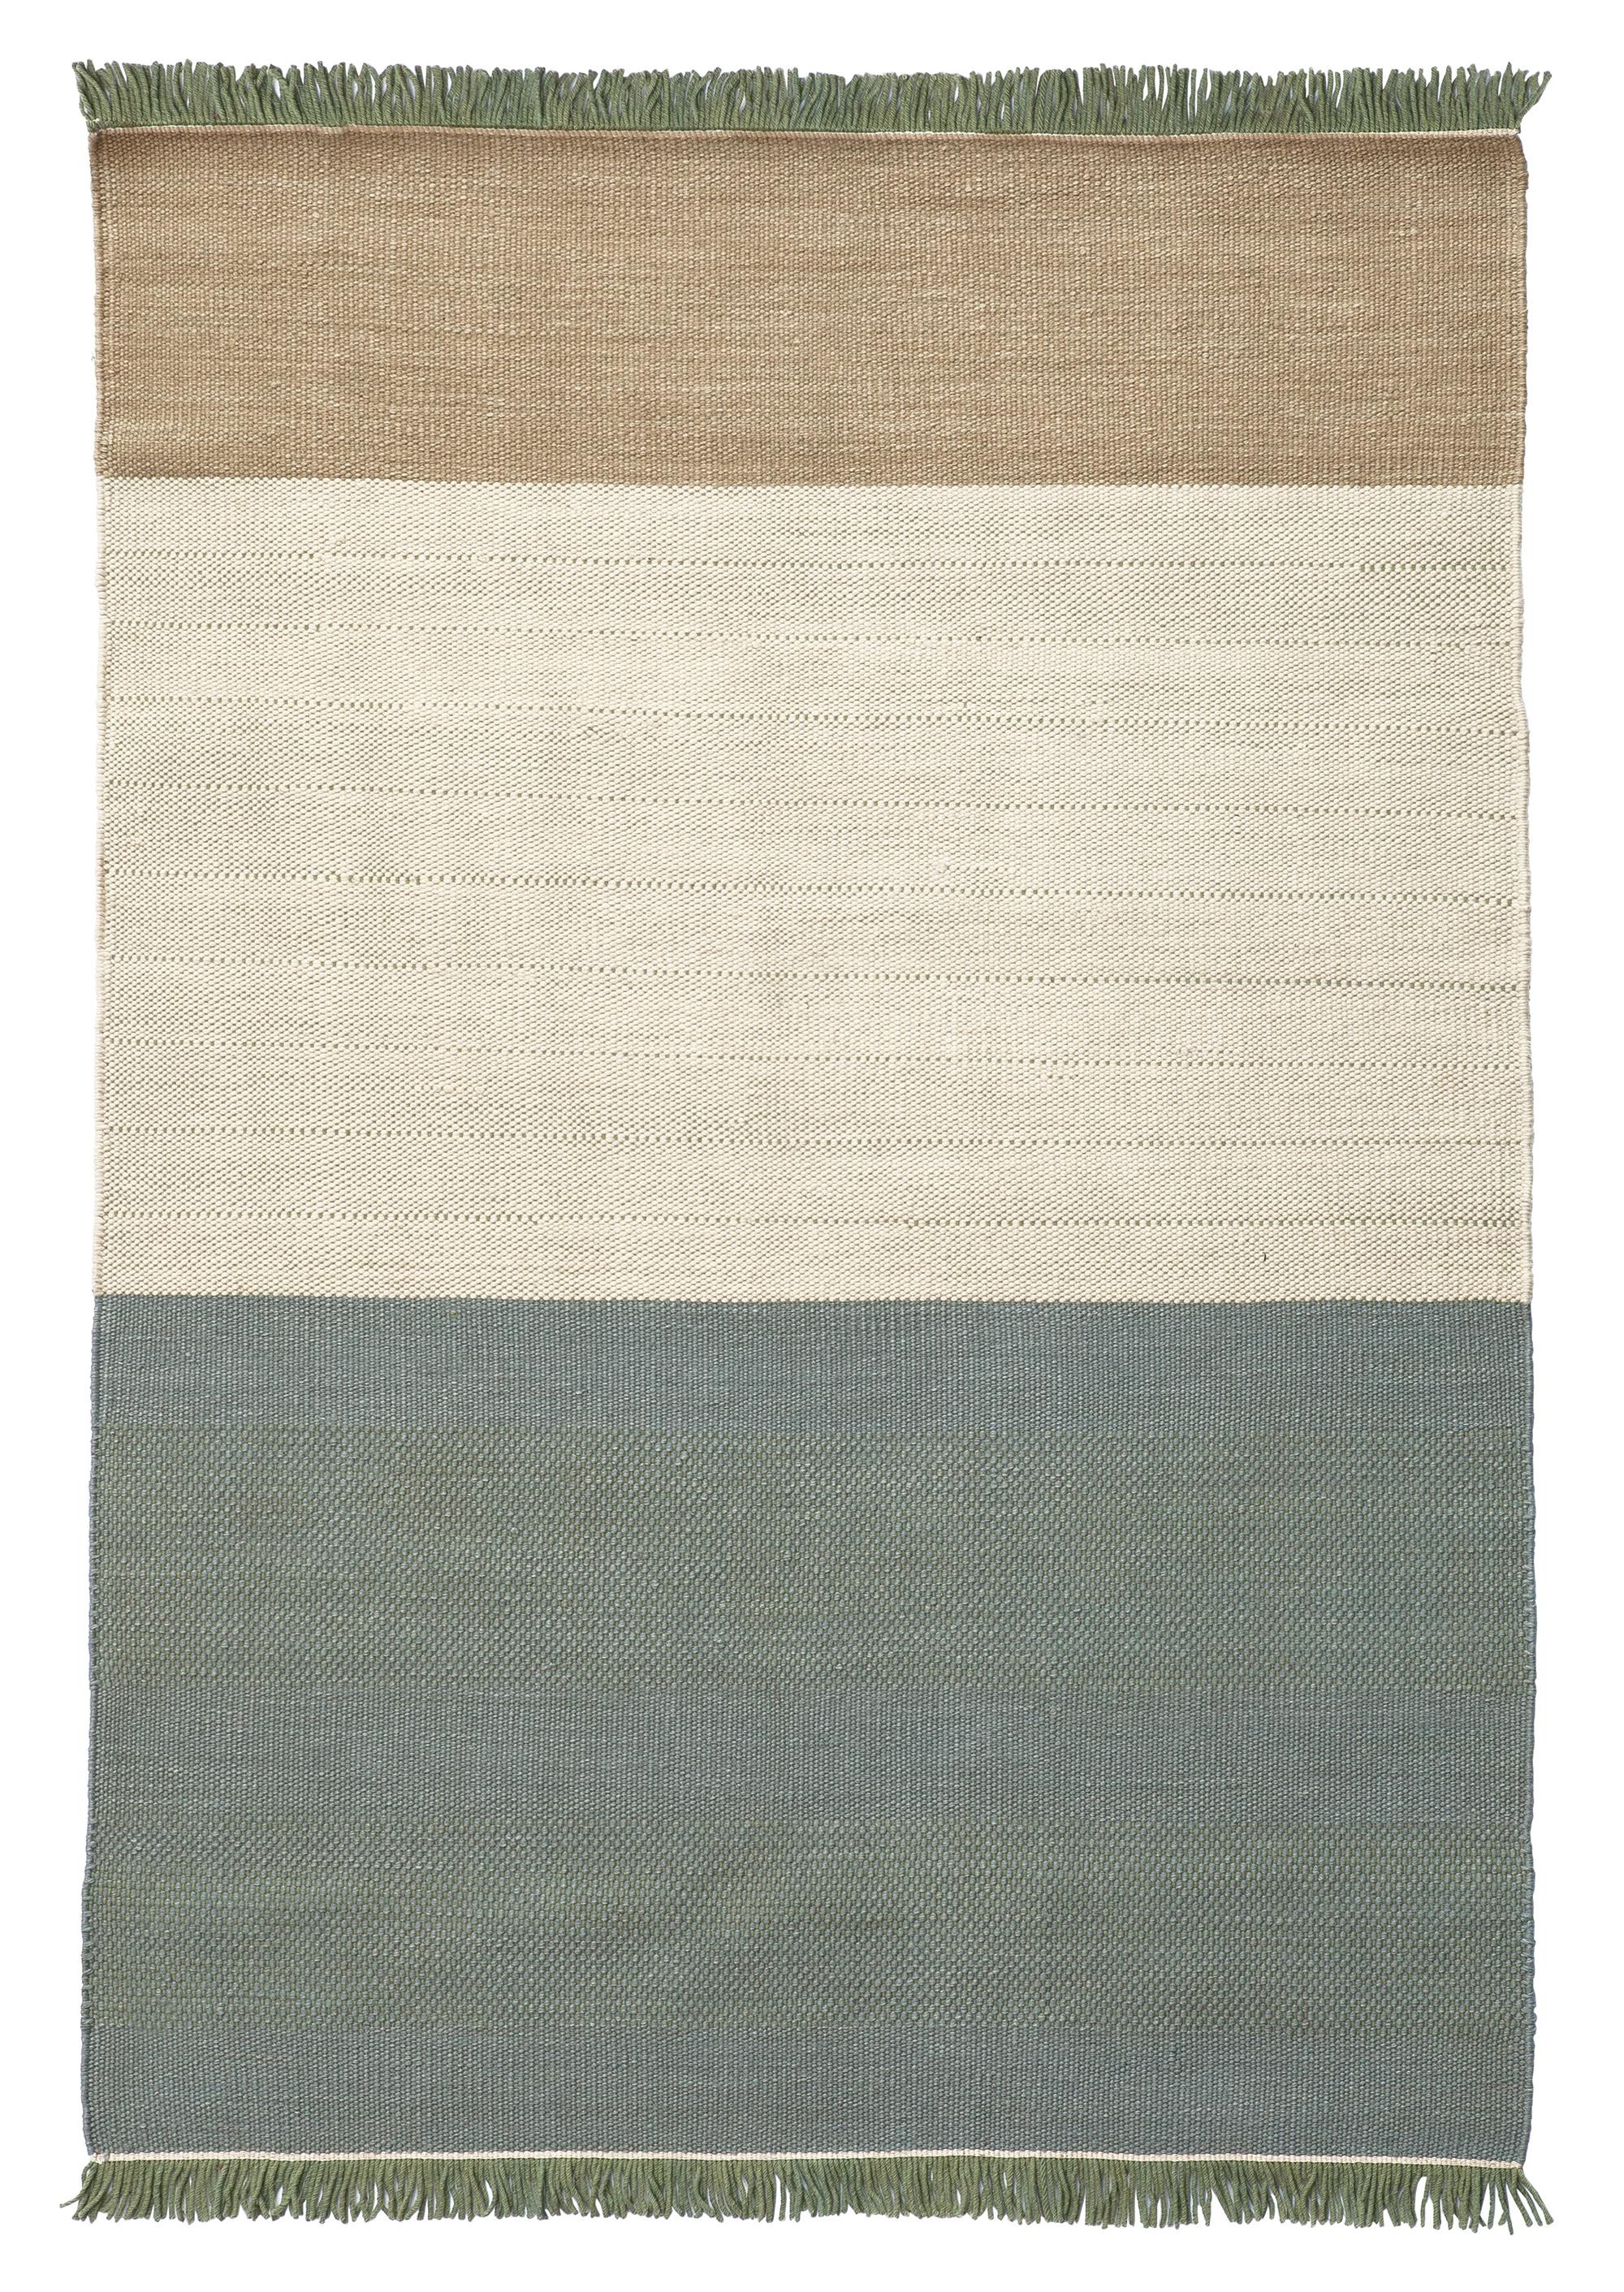 Wool Large 'Tres Stripes' Hand-Loomed Rug for Nanimarquina For Sale